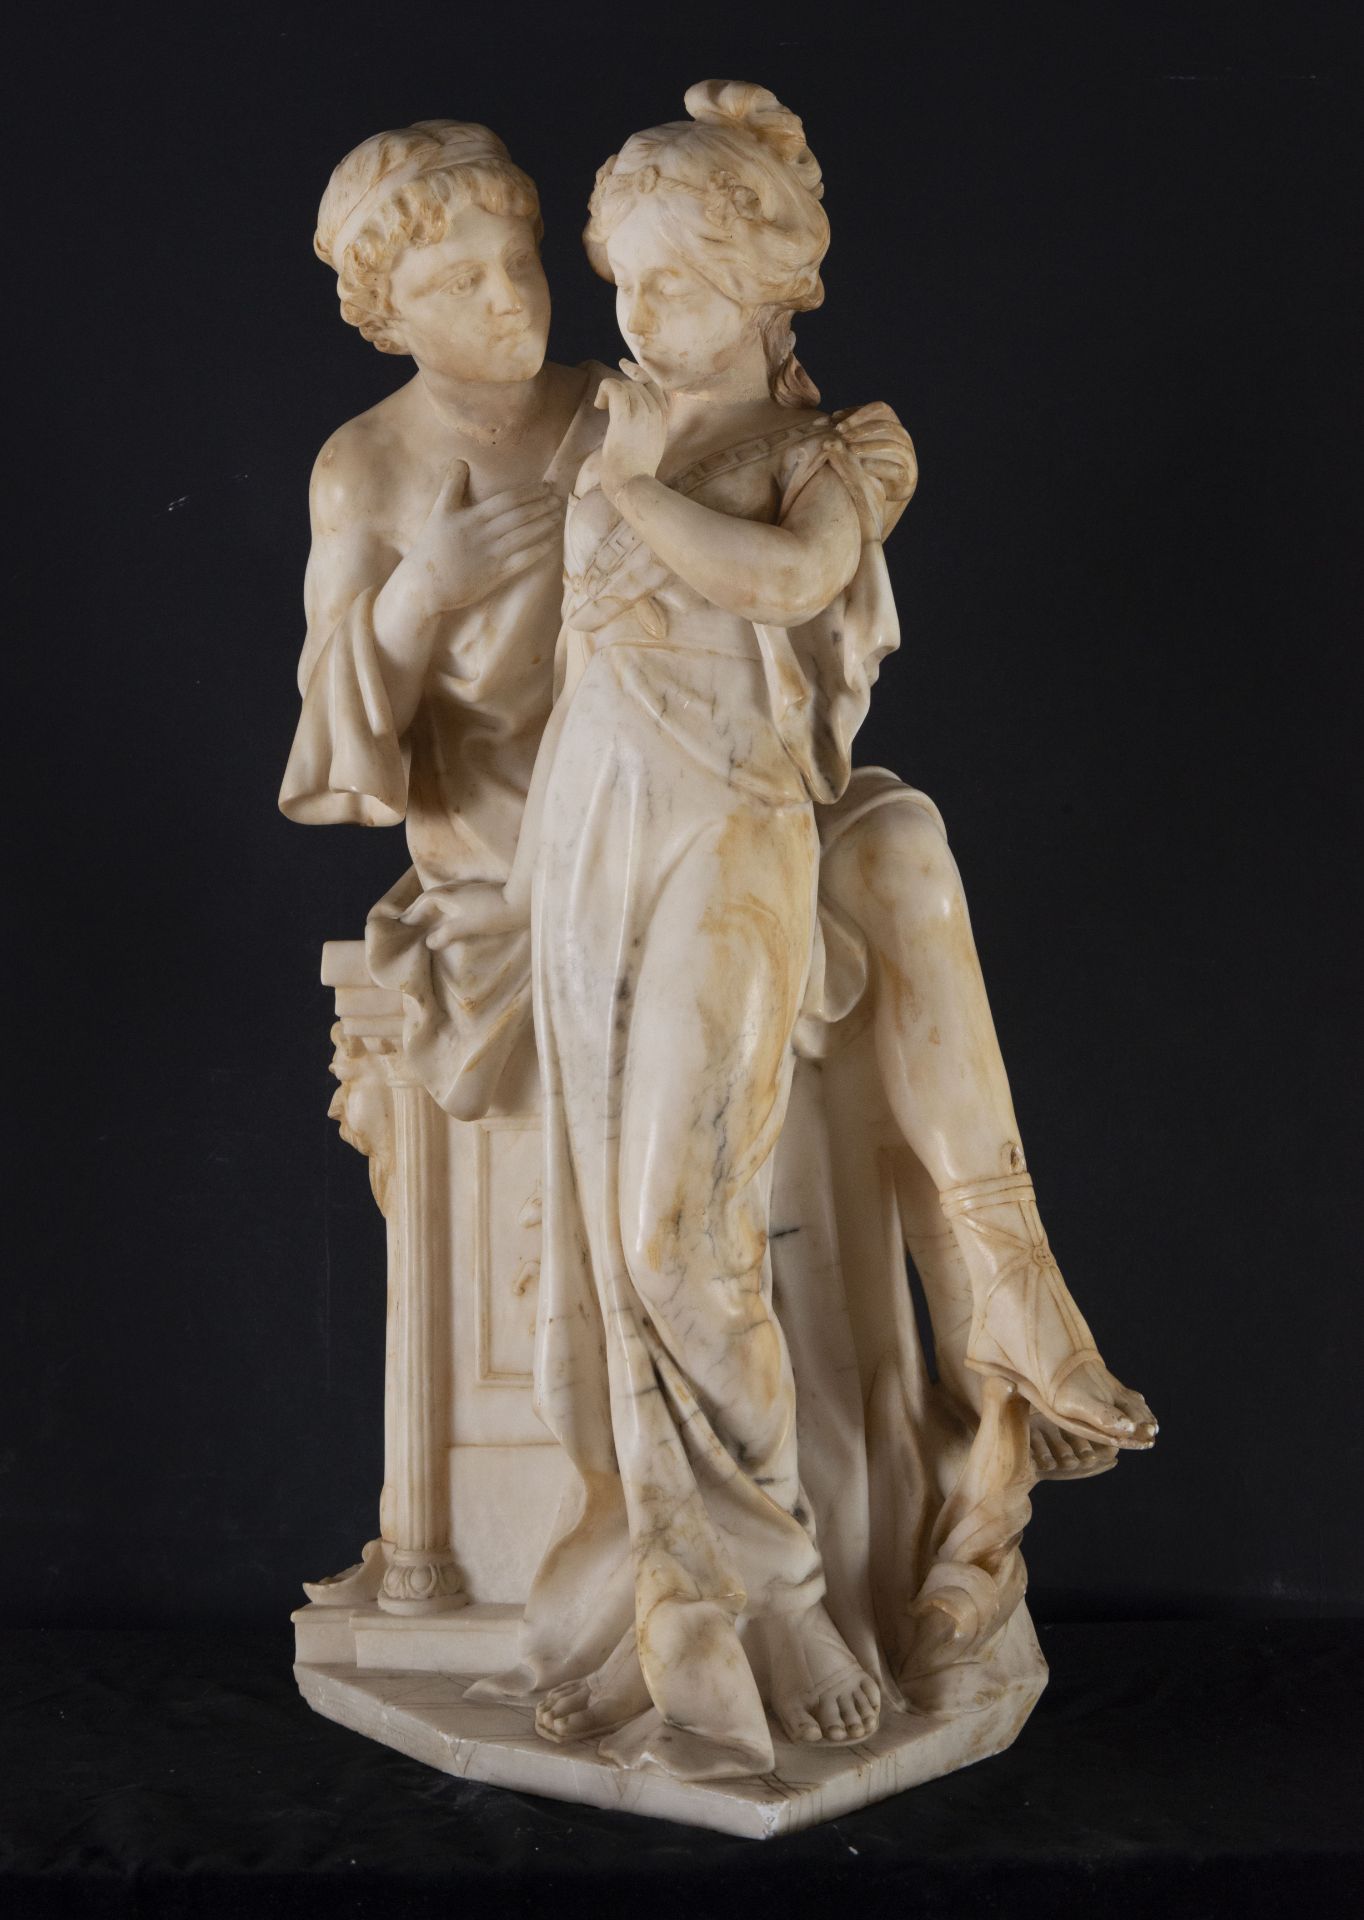 Important Great Couple of Lovers in Alabaster, Adolfo Cipriani, Italy (1880 - 1930), 19th century It - Image 2 of 4